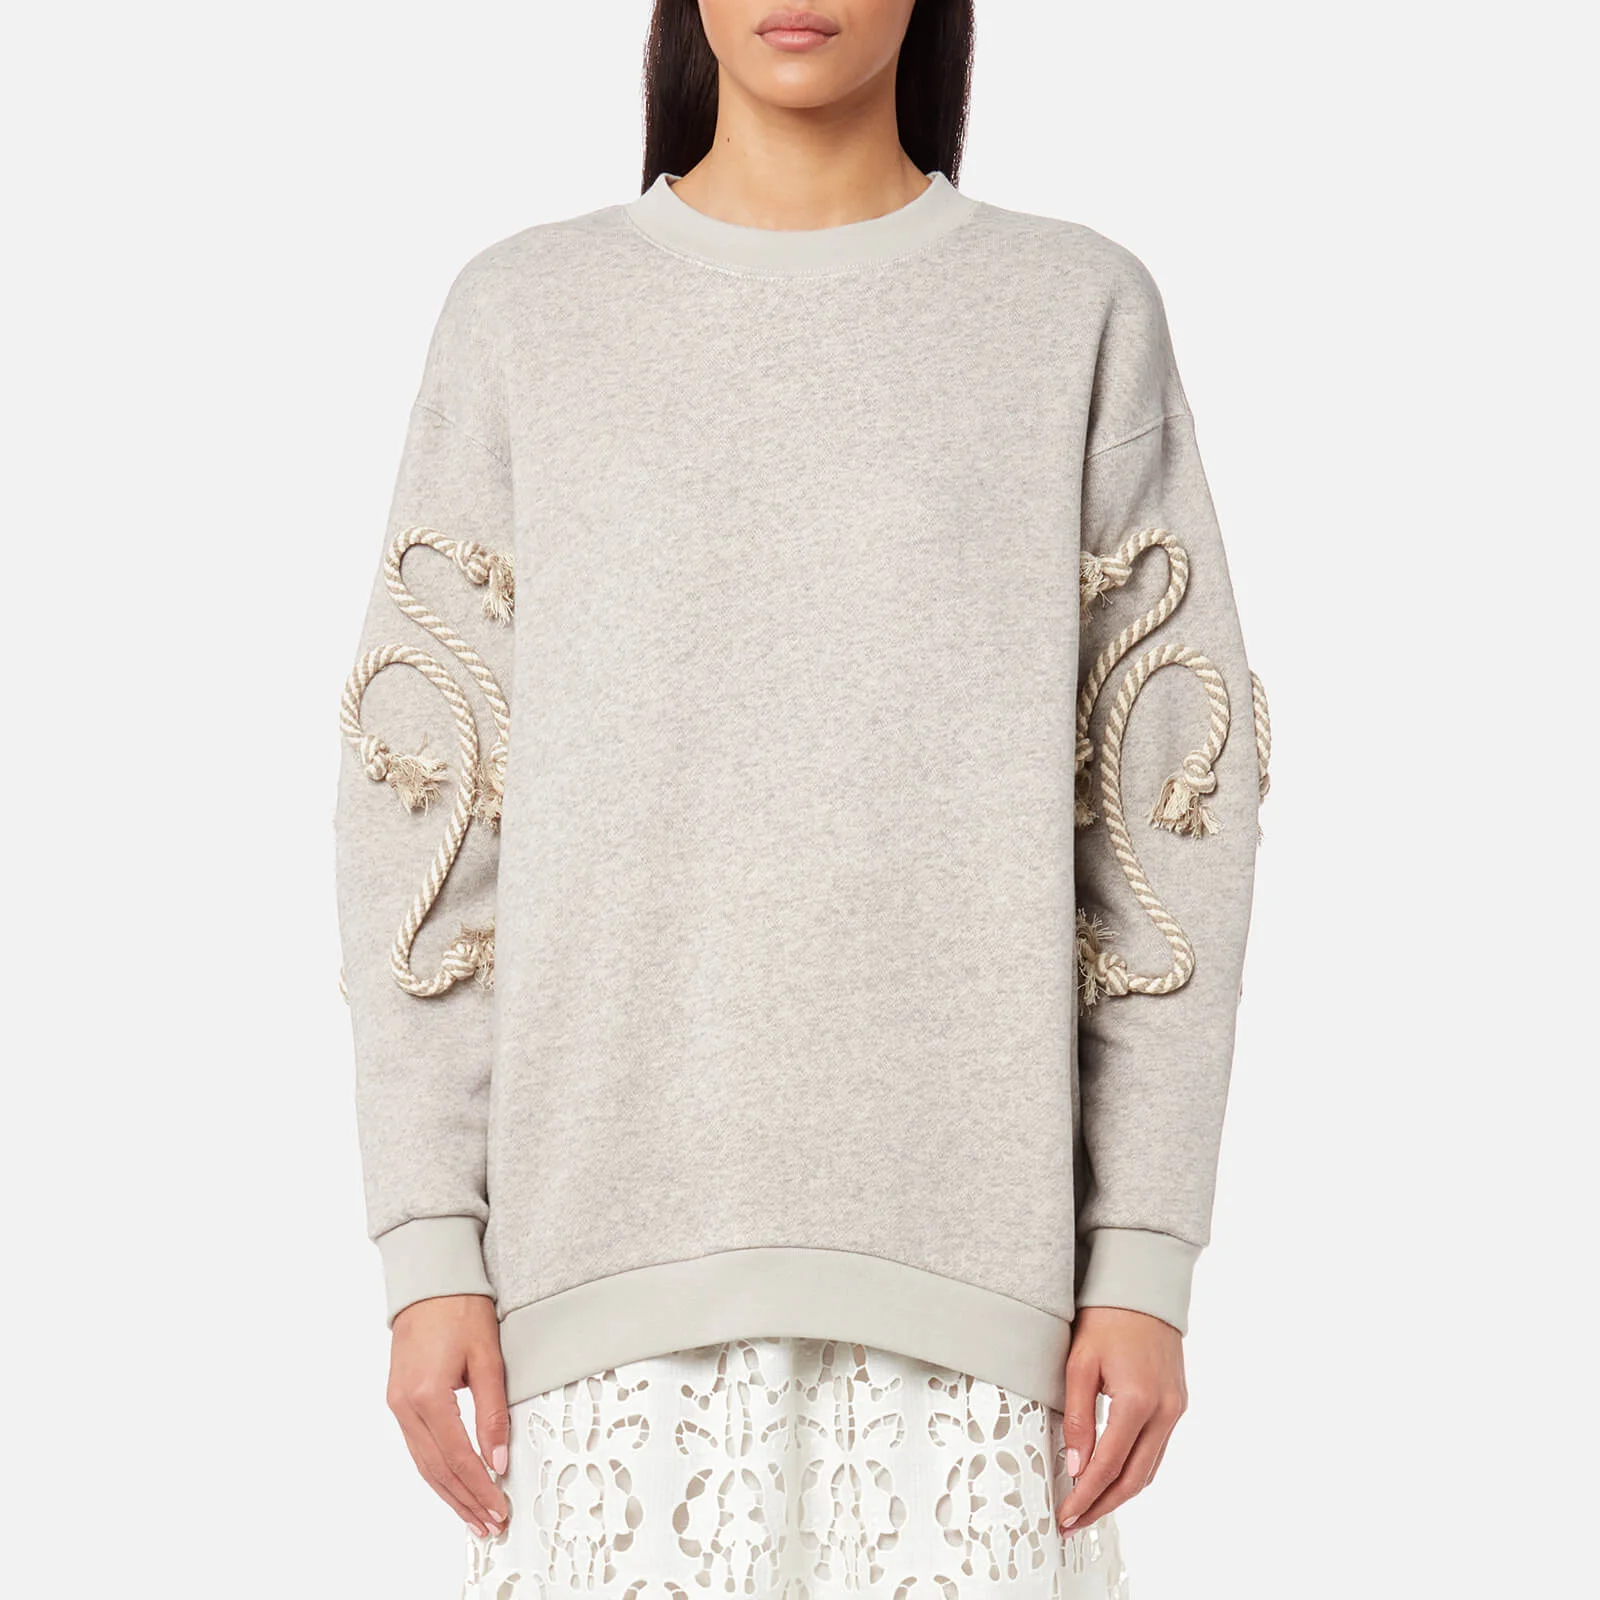 See By Chloé Women's Crafty Fleece Top - Drizzle Grey Image 1